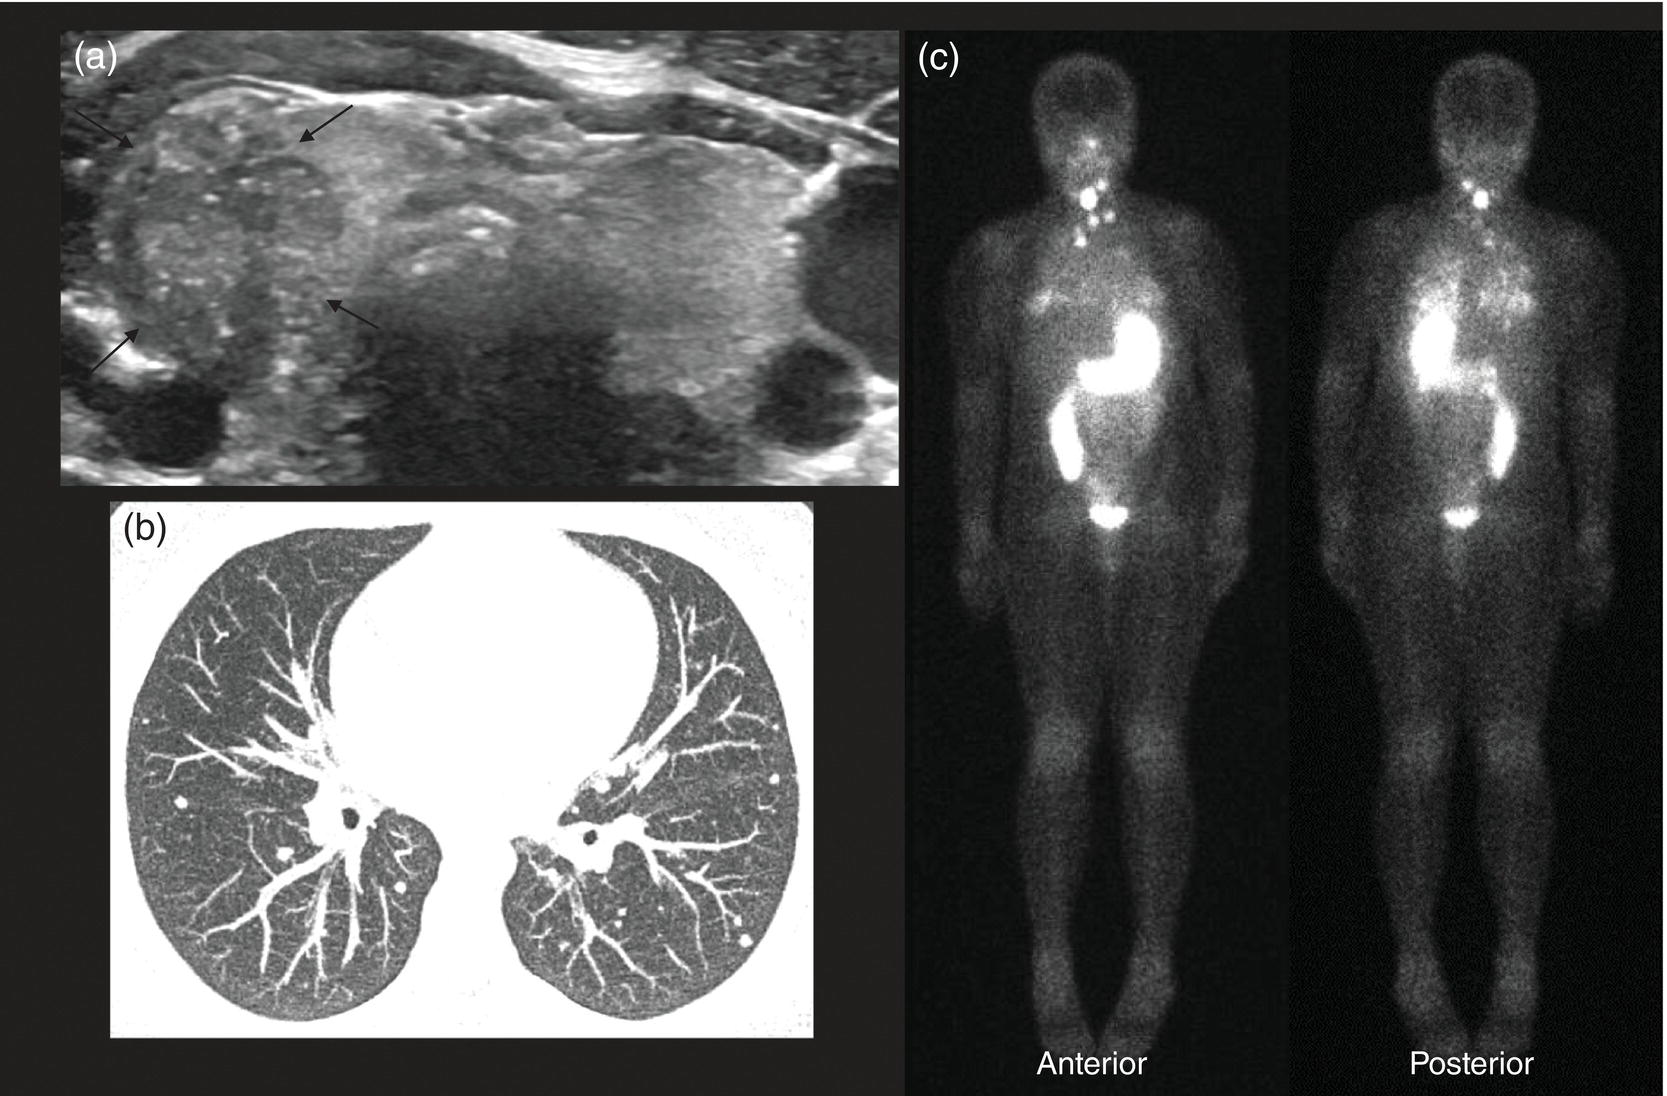 Schematic illustration of (a) 10-year-old female with papillary thyroid carcinoma diagnosed by FNA. (b) Chest CT (maximum intensity reconstruction) with numerous pulmonary metastatic nodules. (c) Staging 123I whole-body scan after total thyroidectomy shows residual and local metastatic lymph nodes in the neck as well as diffuse pulmonary metastases. 